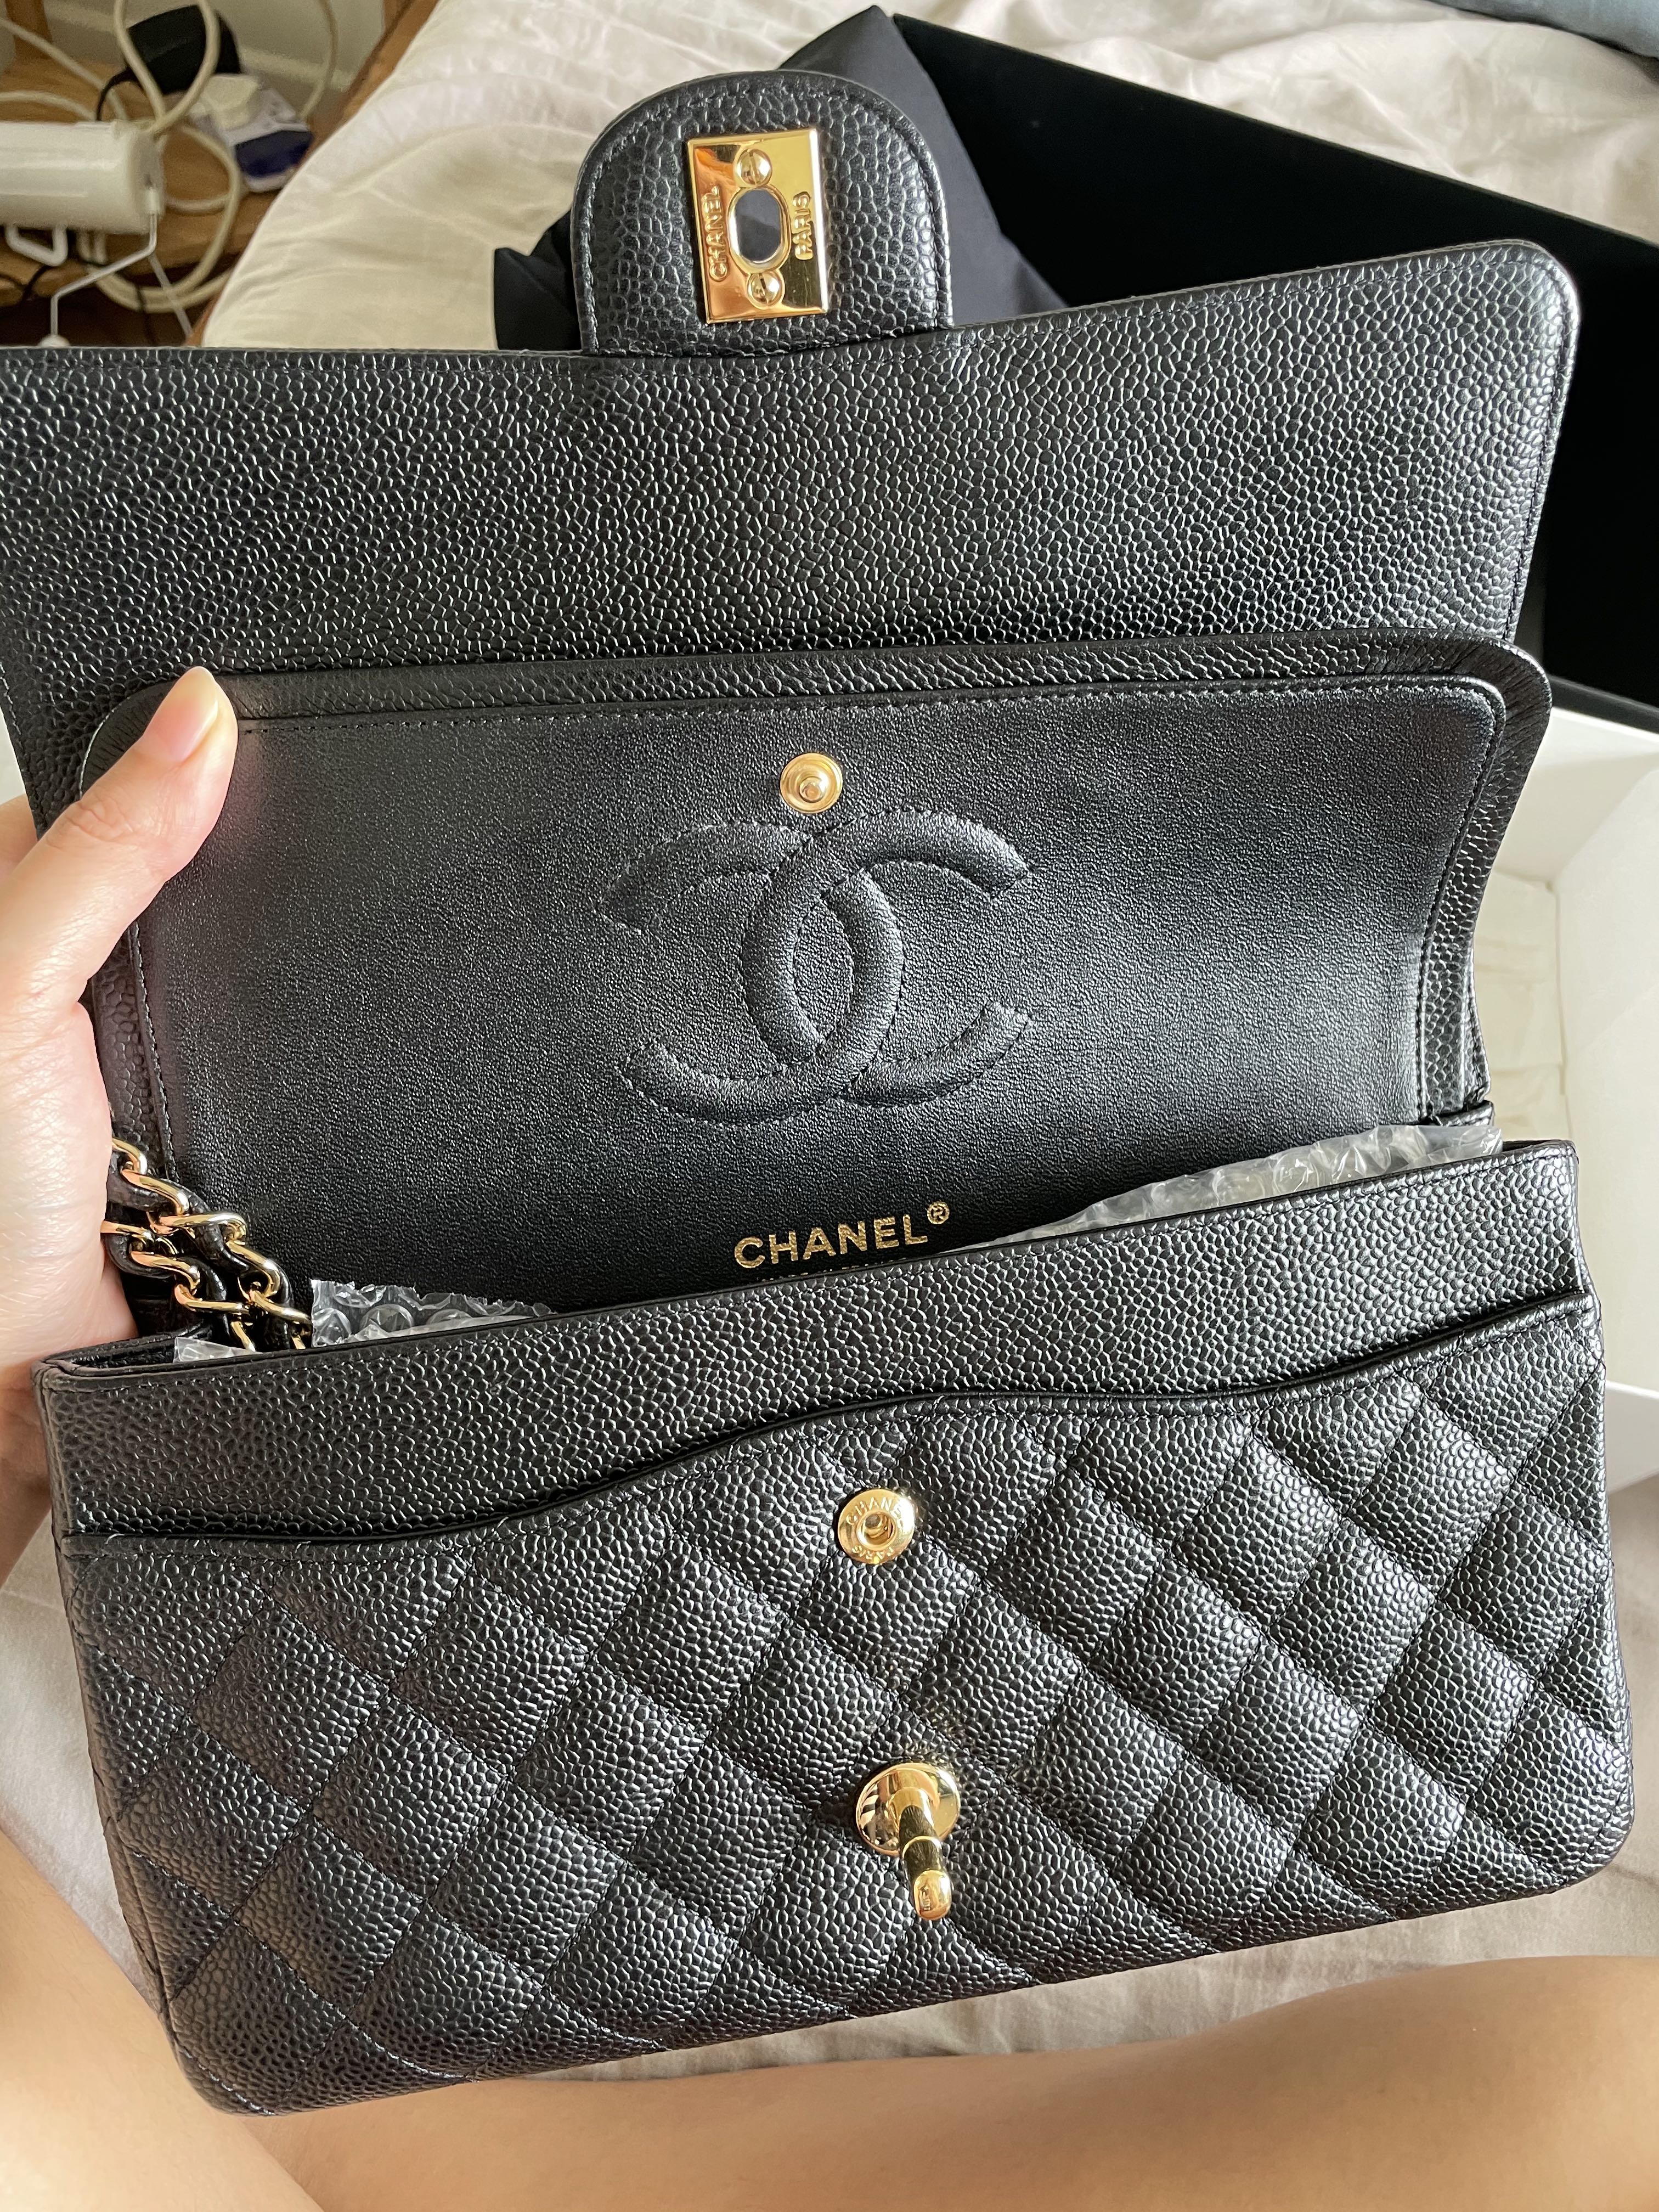 RESERVED* *SUPER RARE* Chanel Classic Flap Medium Caviar with